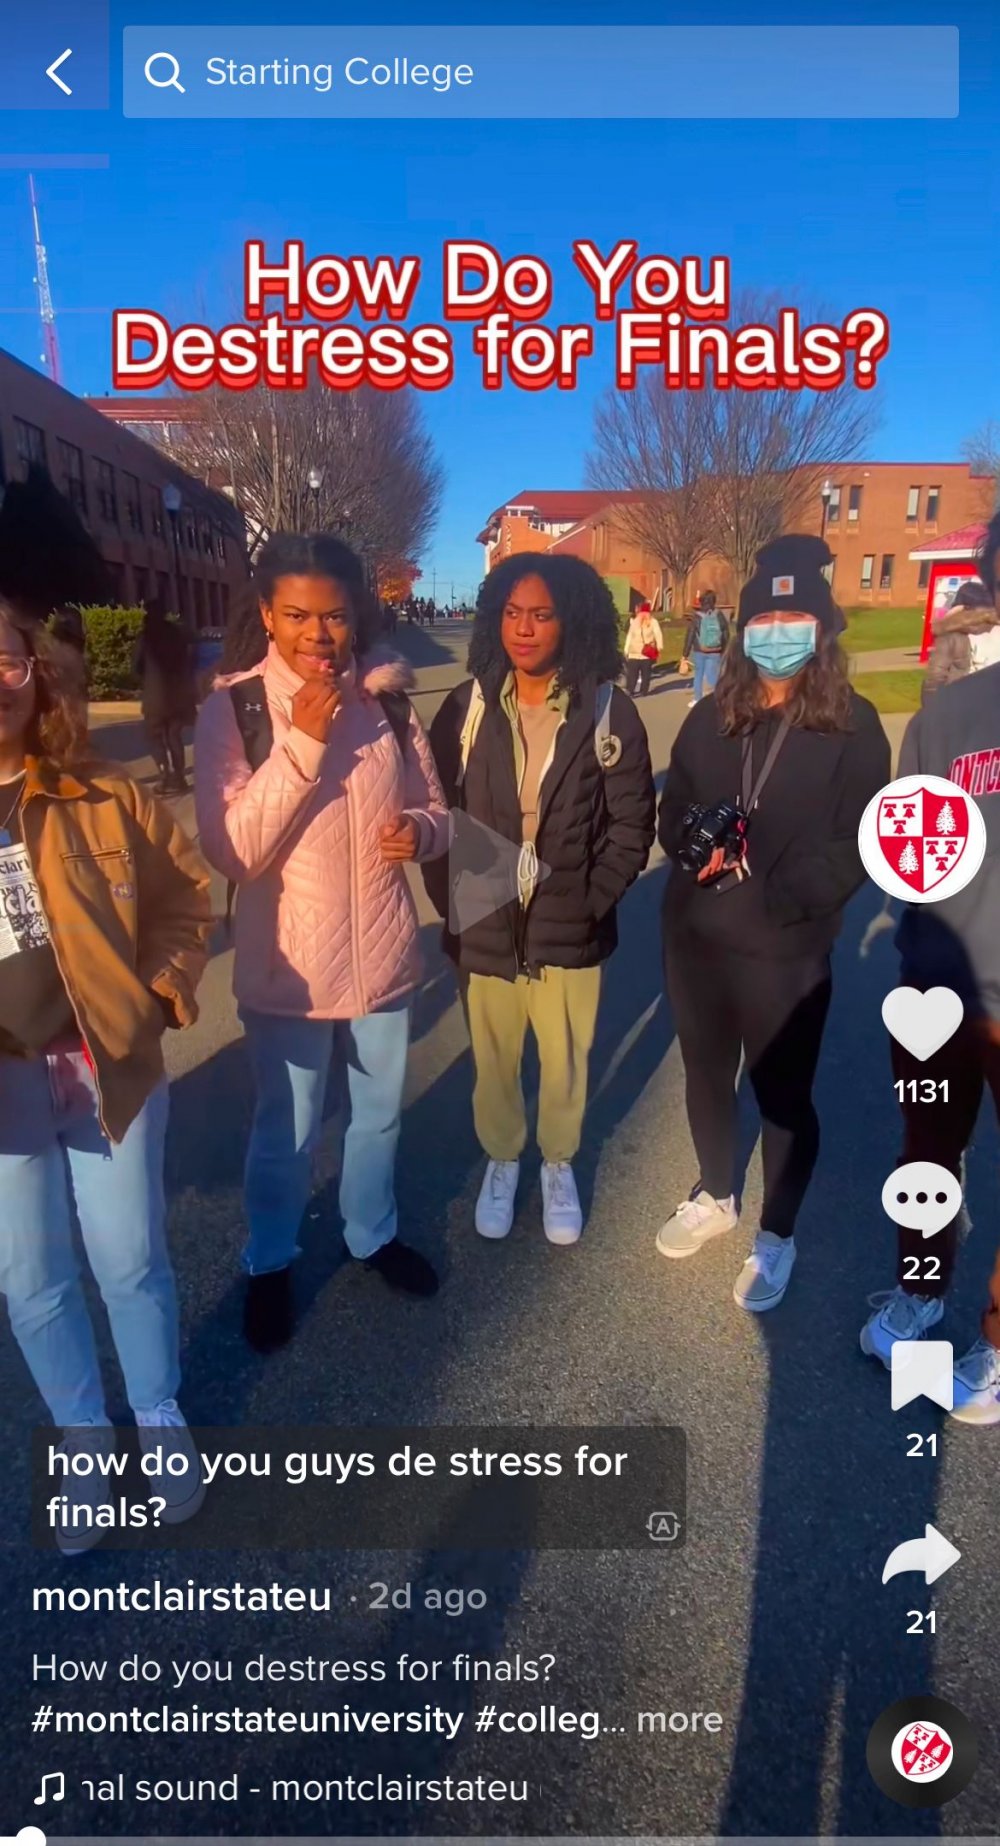 Students on campus at Montclair State University talk about how they destress for finals on TikTok